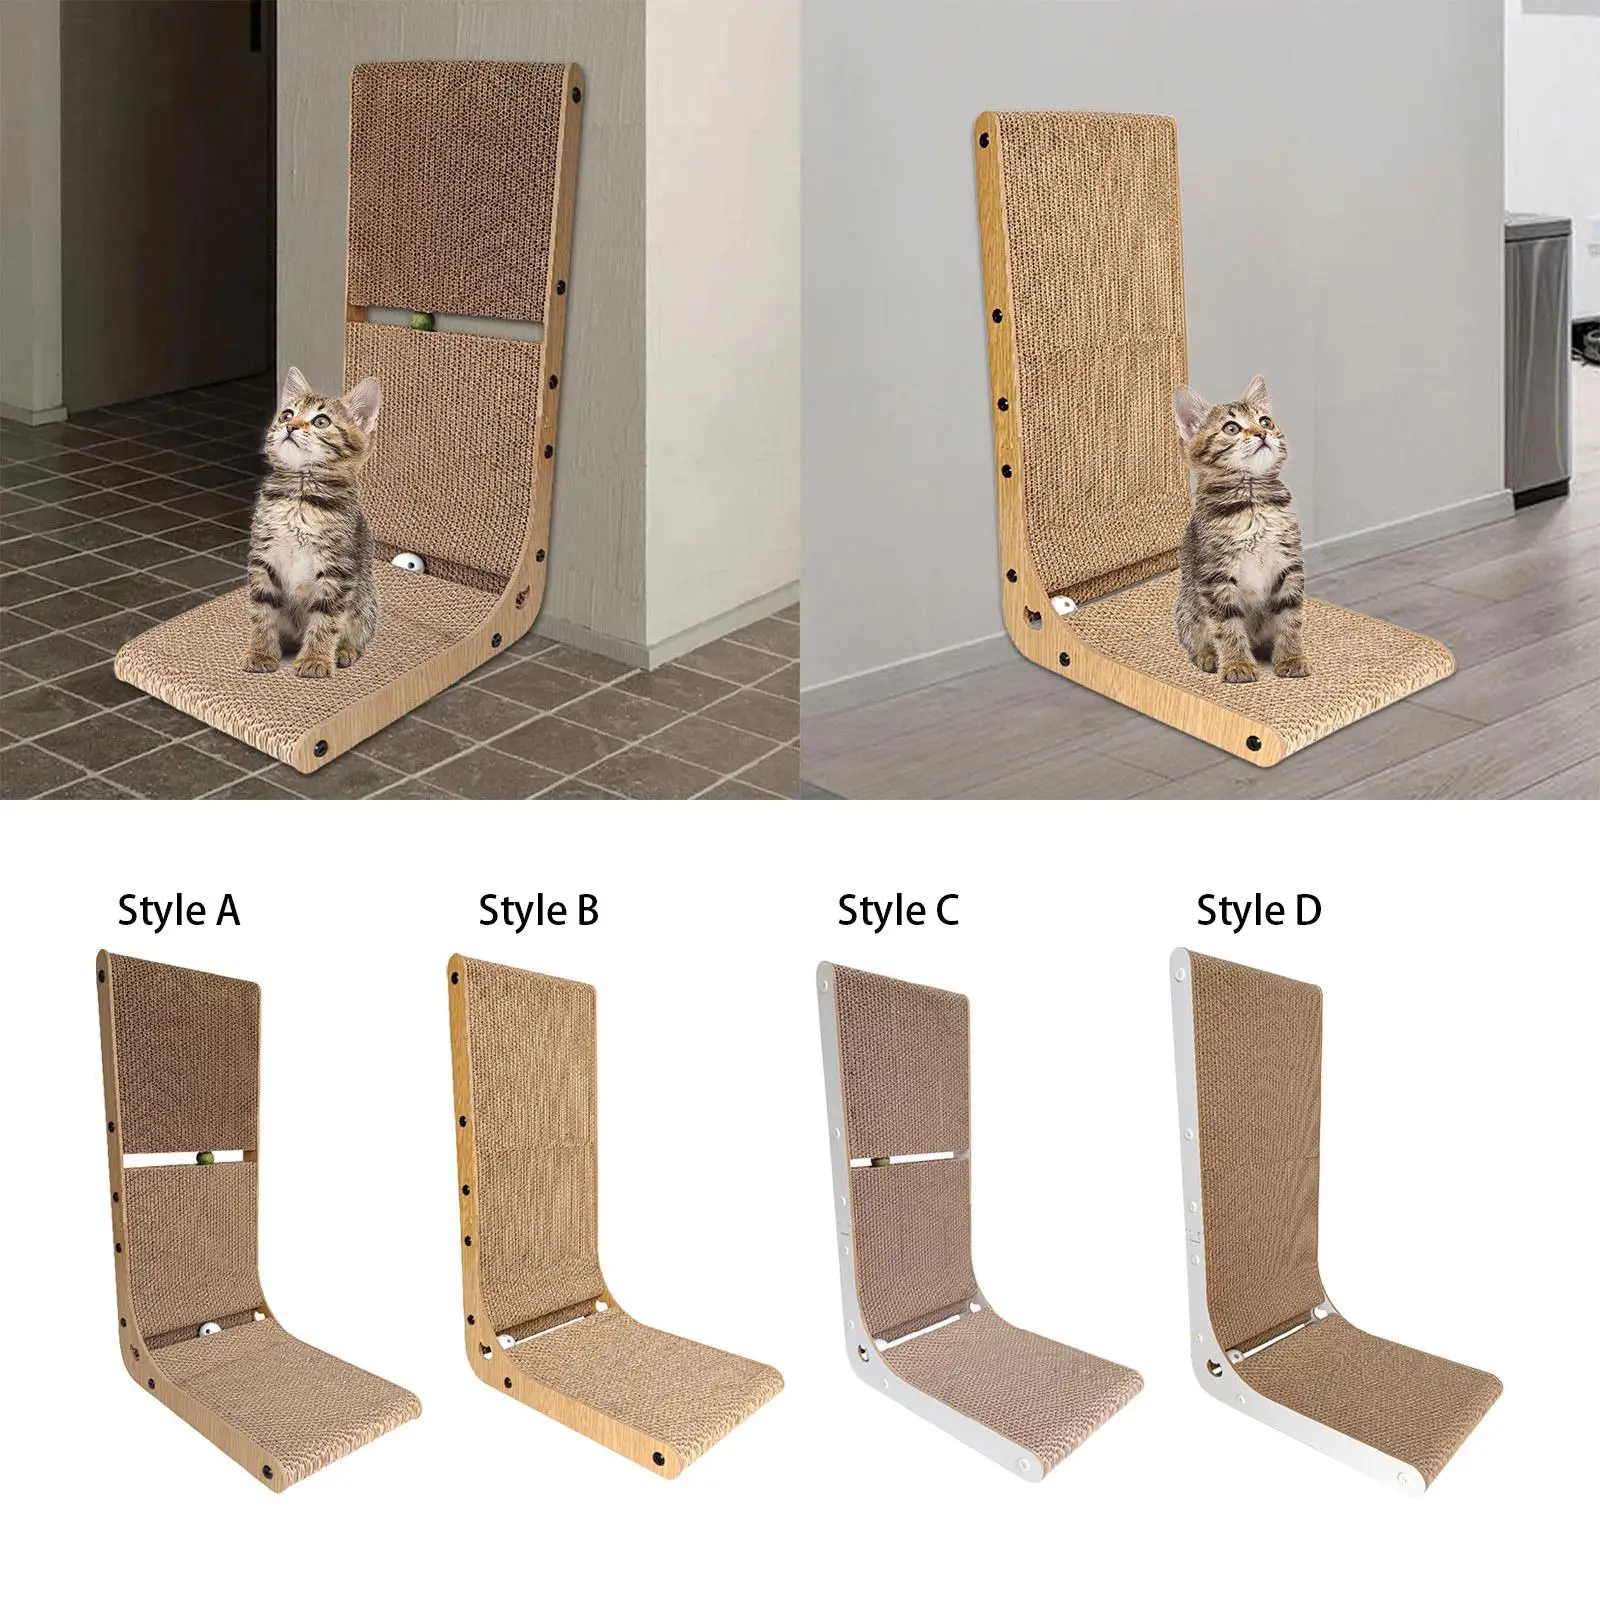 Cardboard Cat Scratcher L Cats Lounge Saving Space Sturdy Material Recyclable with Toys Ball Track Bed Horizontal